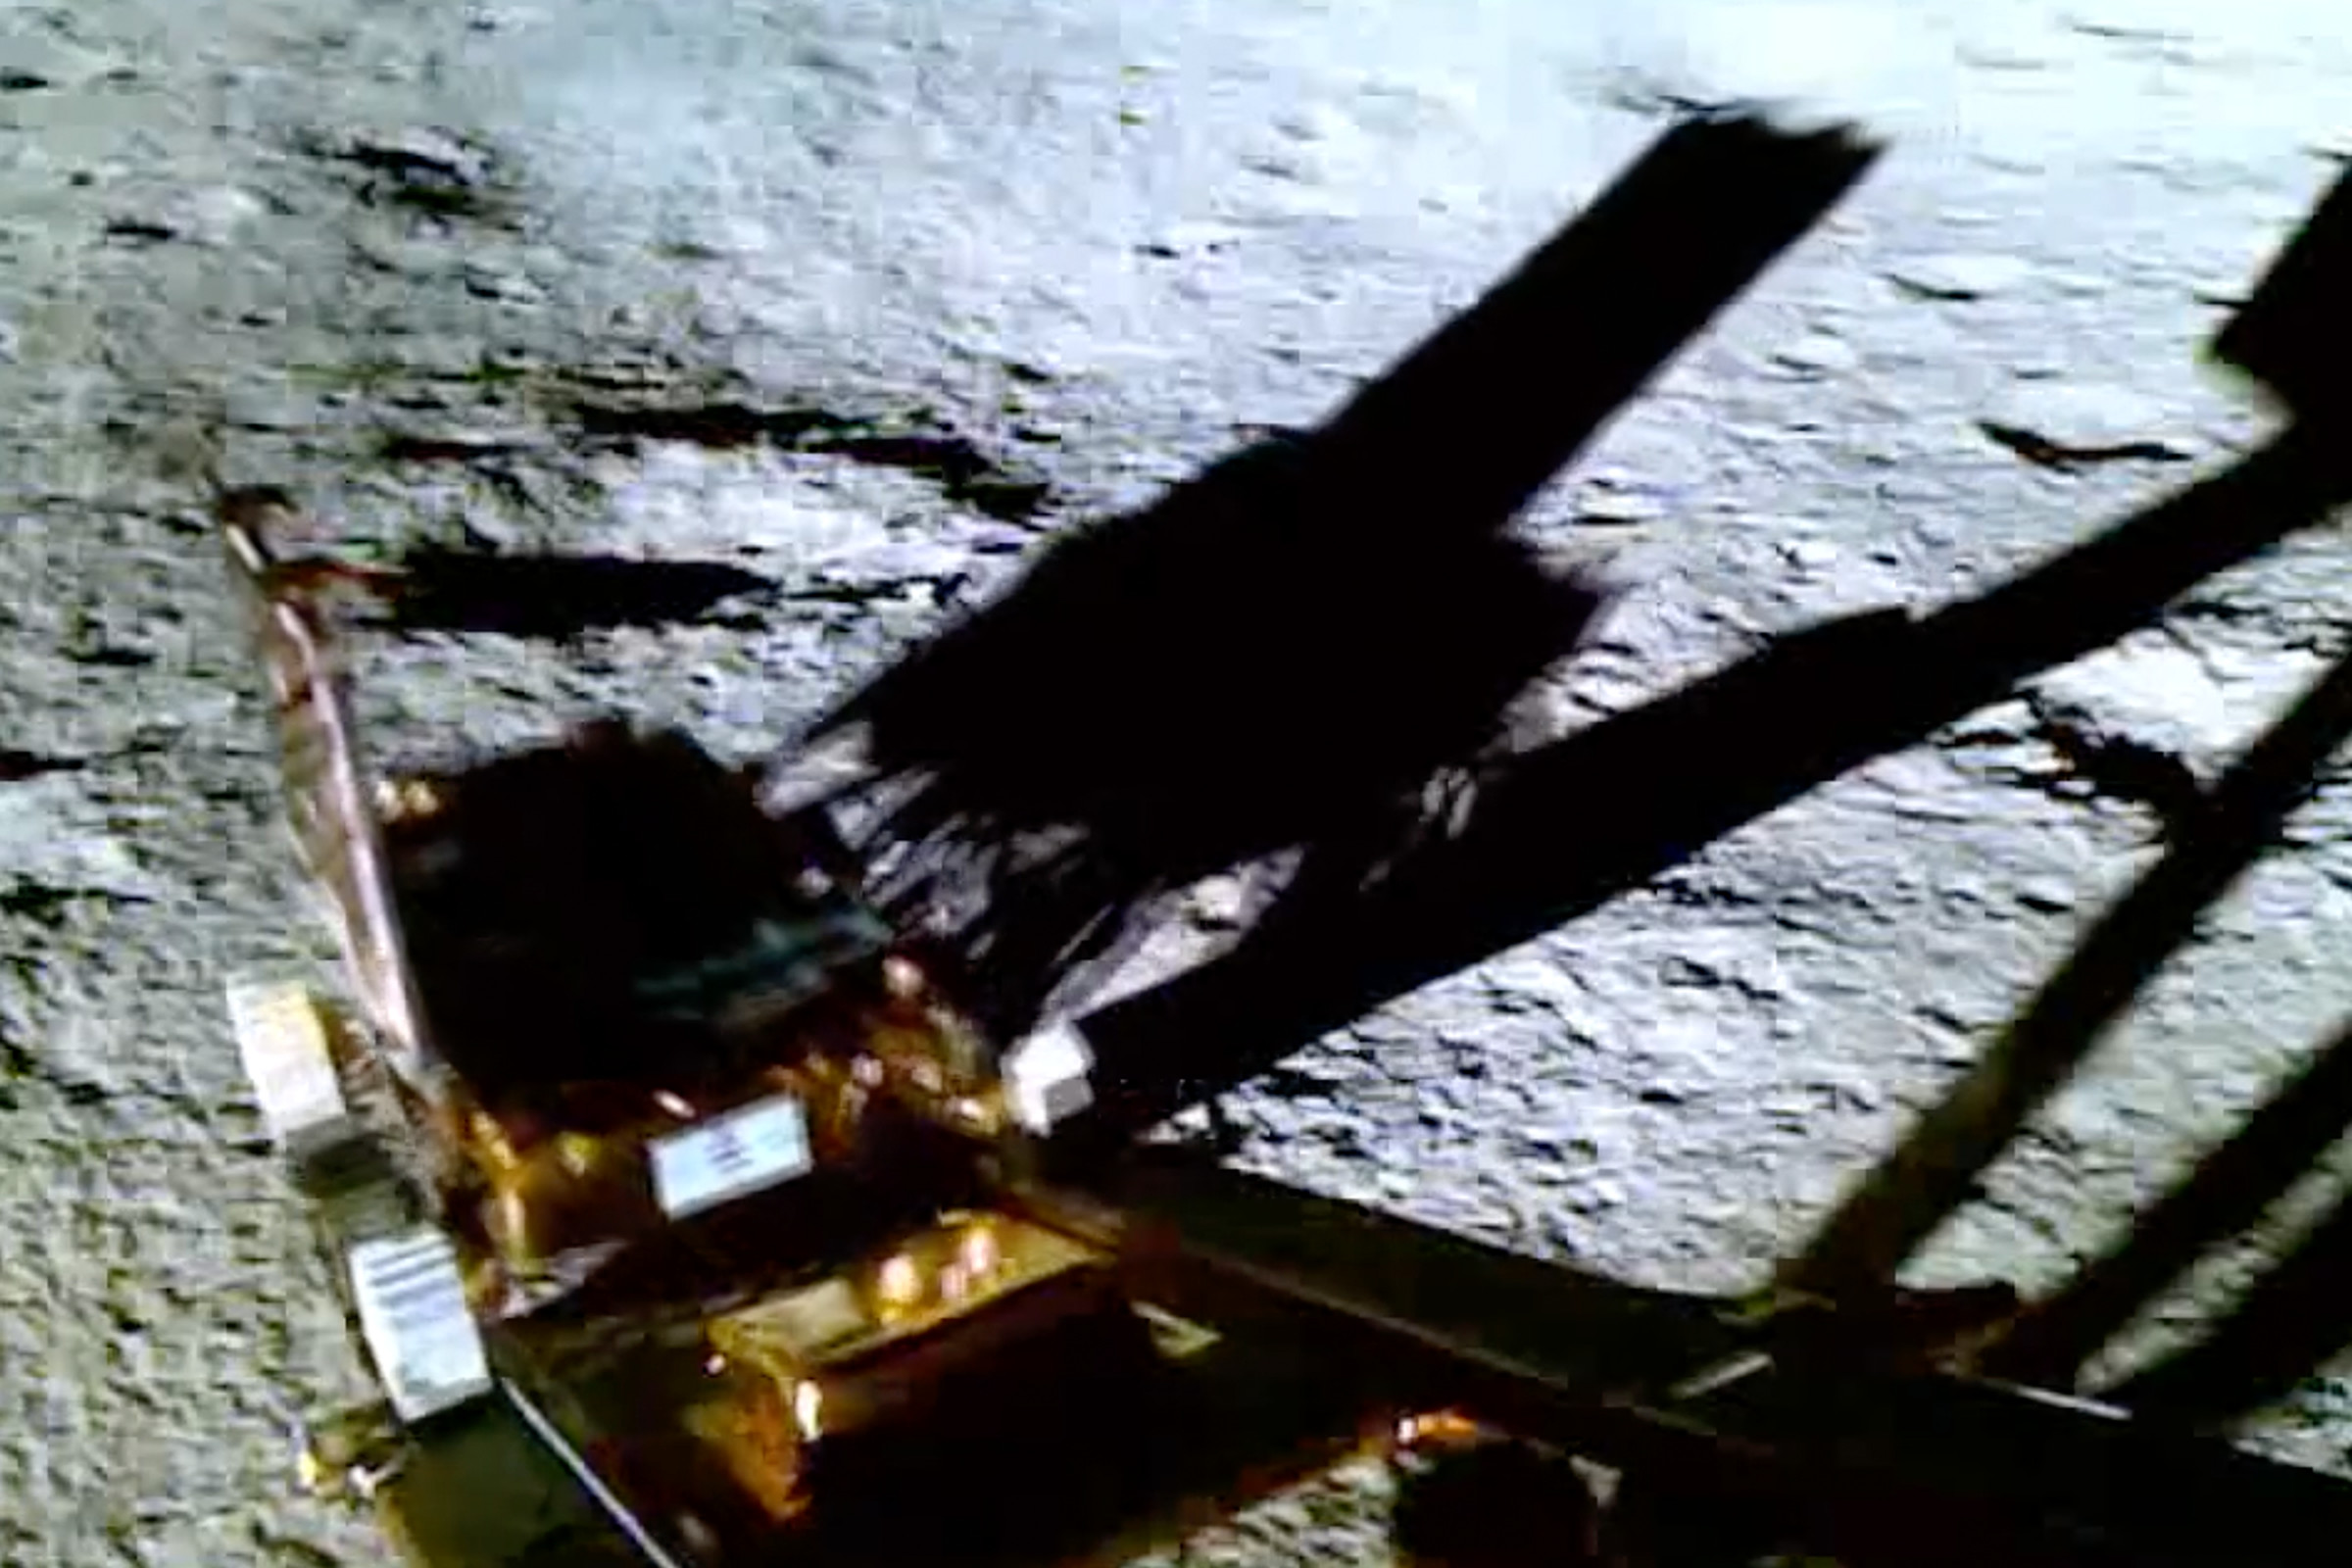 An image of the Chandrayaan-3 rover as it reaches the end of the landing ramp. In the background, the pocked surface of the Moon fills about the top two-thirds of the image. The picture is in color, showing the copper-colored foil that covers the sides of the rover.